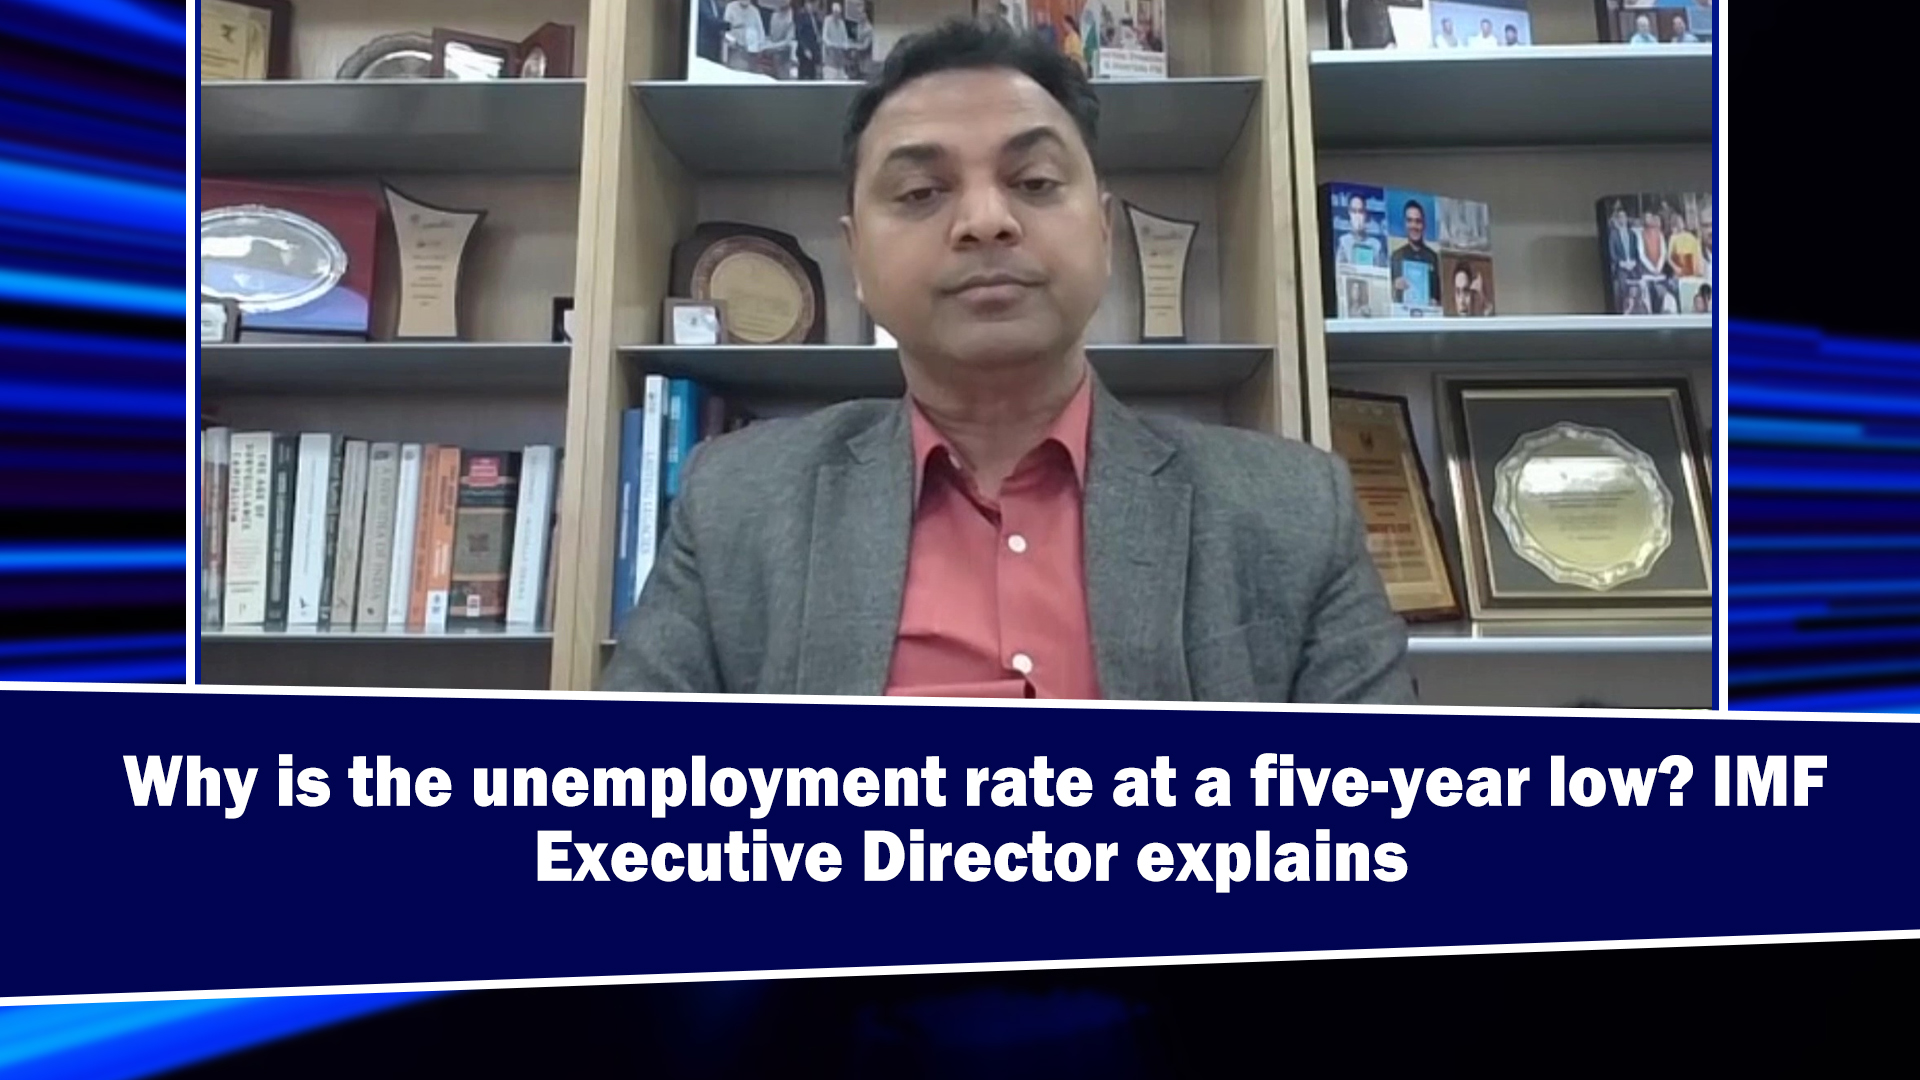 Why is the unemployment rate at a five-year low? IMF Executive Director explains